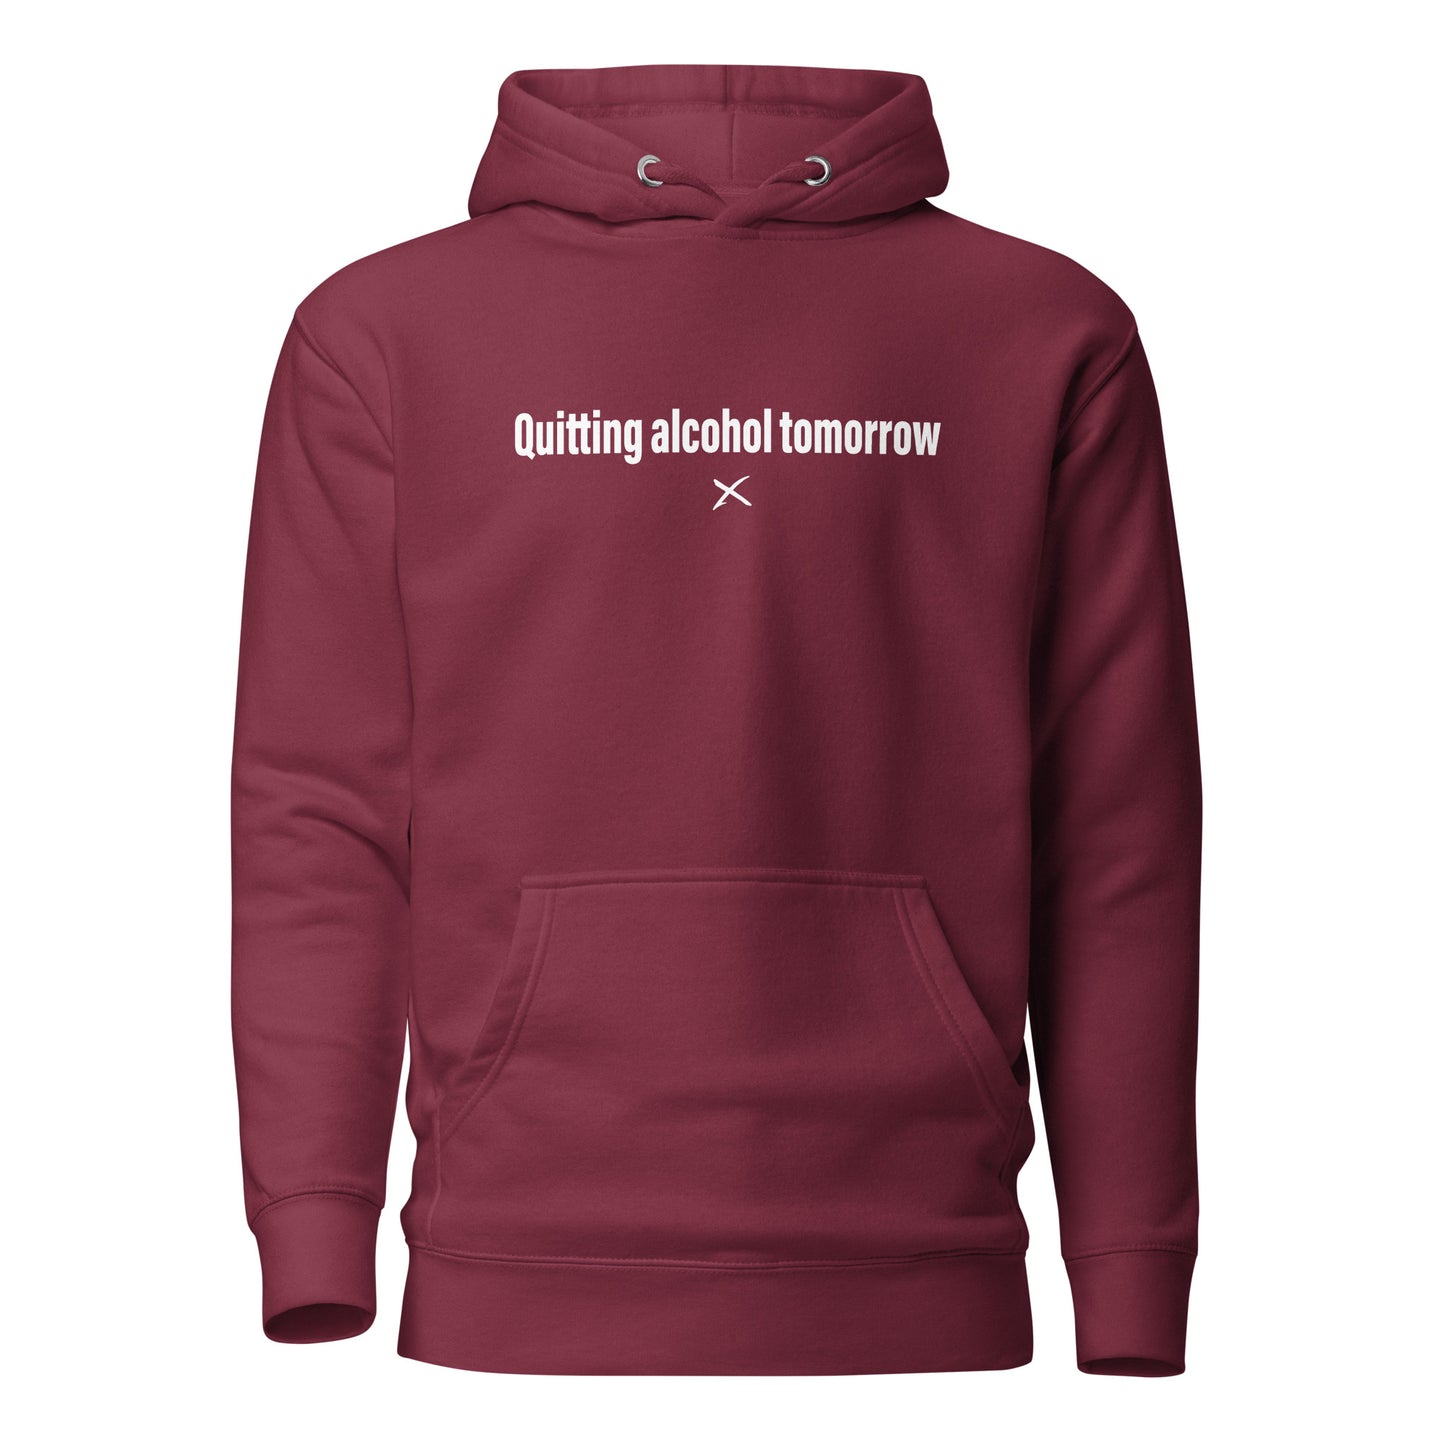 Quitting alcohol tomorrow - Hoodie